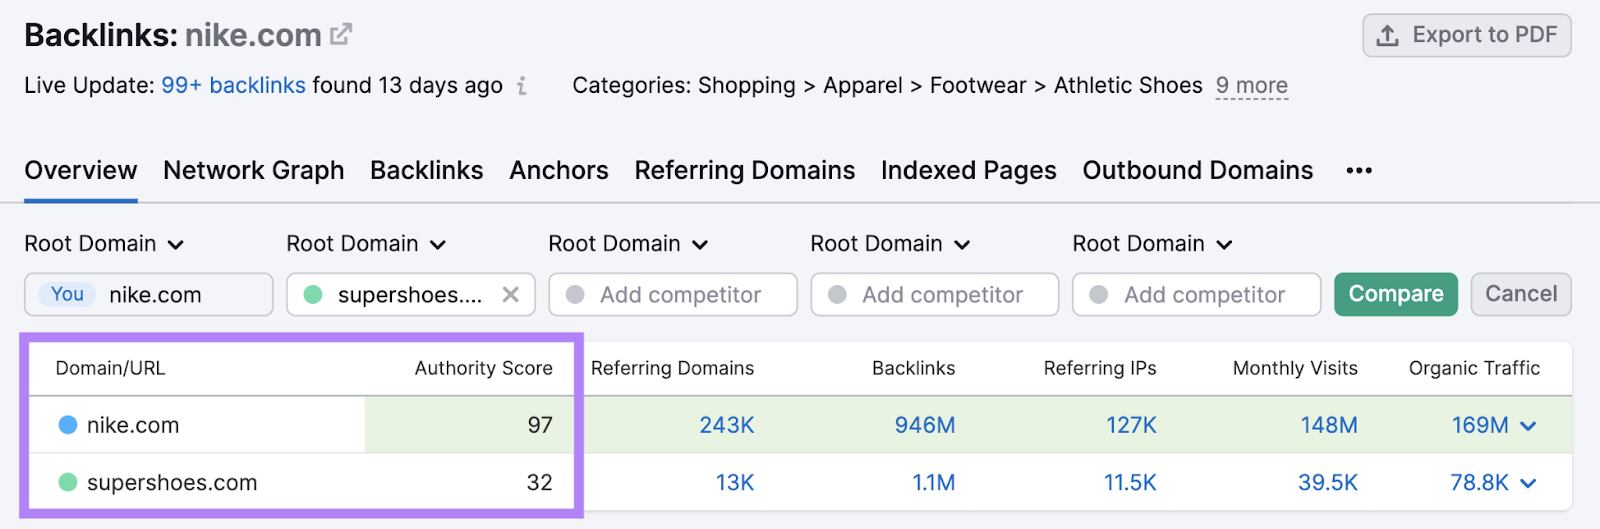 Authority Score shown for nike.com and supershoes.com in Backlink Analytics tool